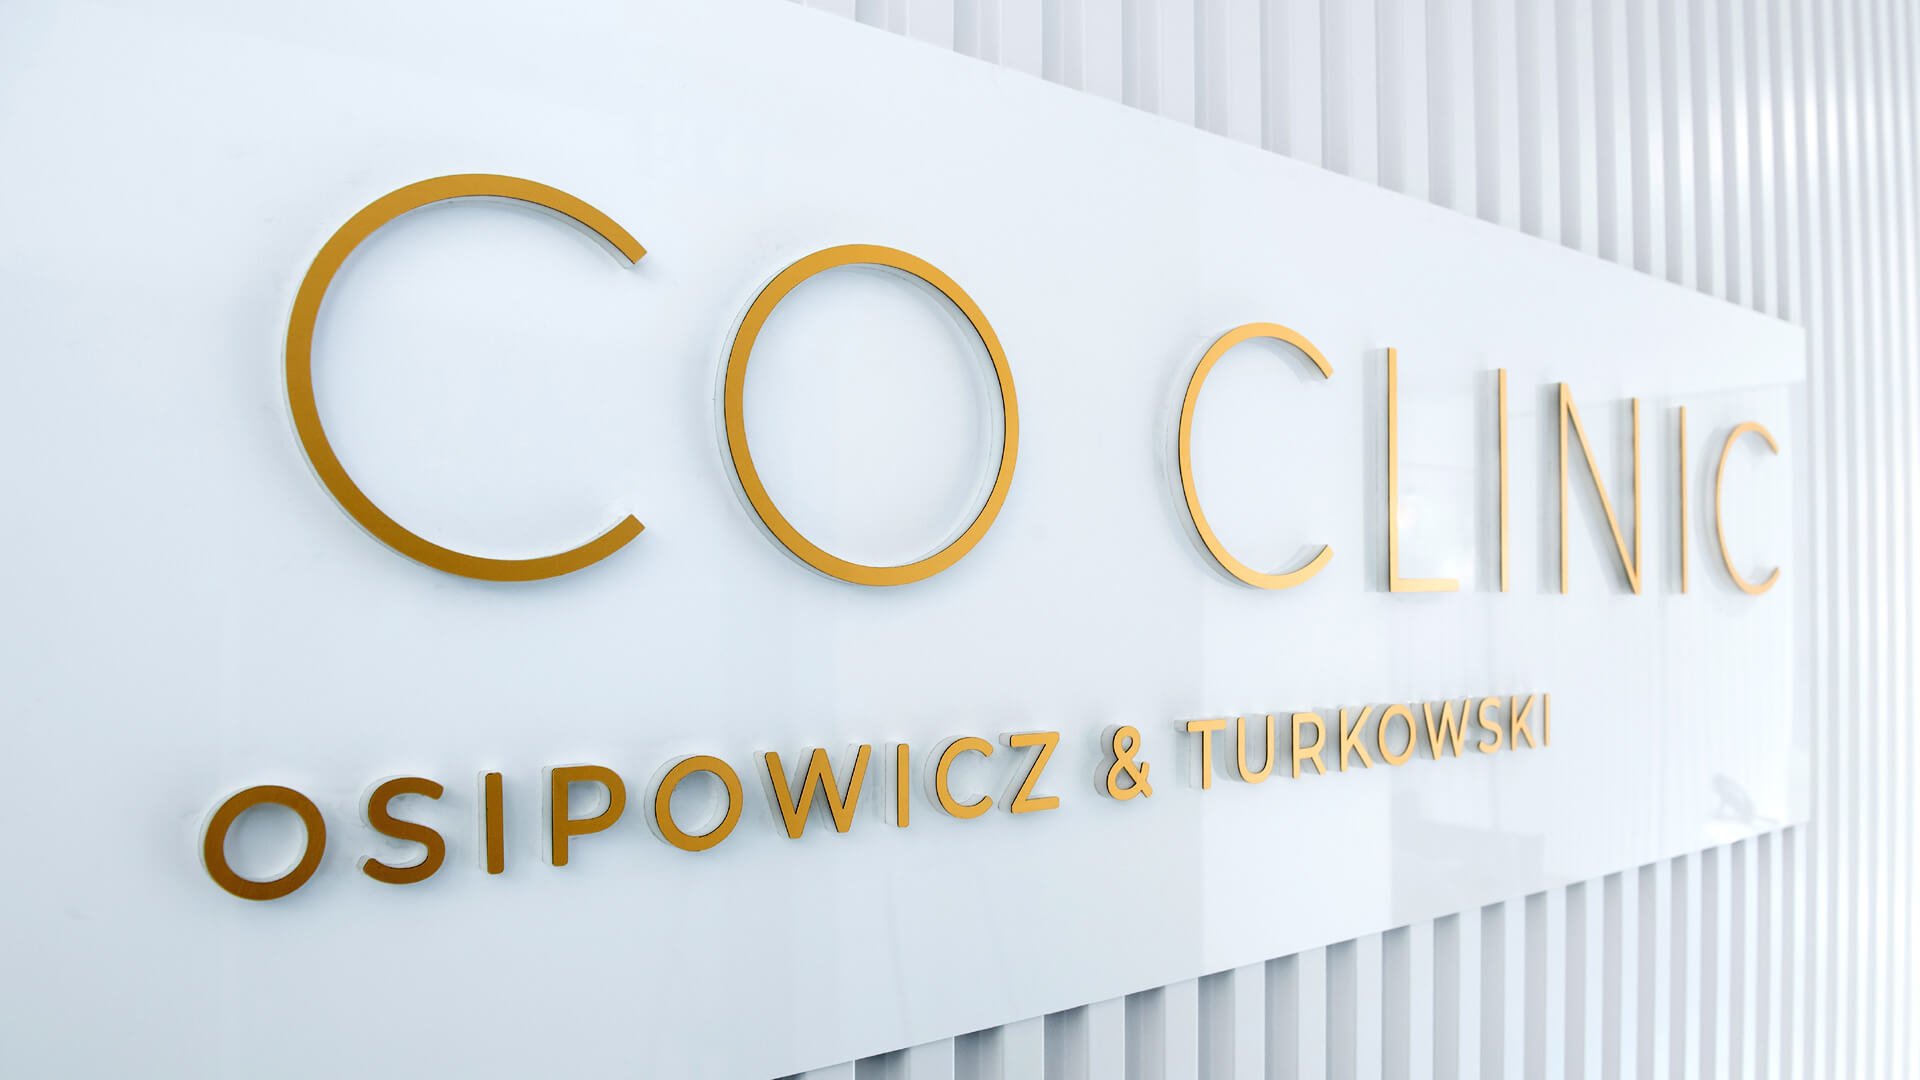 Gold prismatic letters on the wall in the reception area of OT.CO Clinic